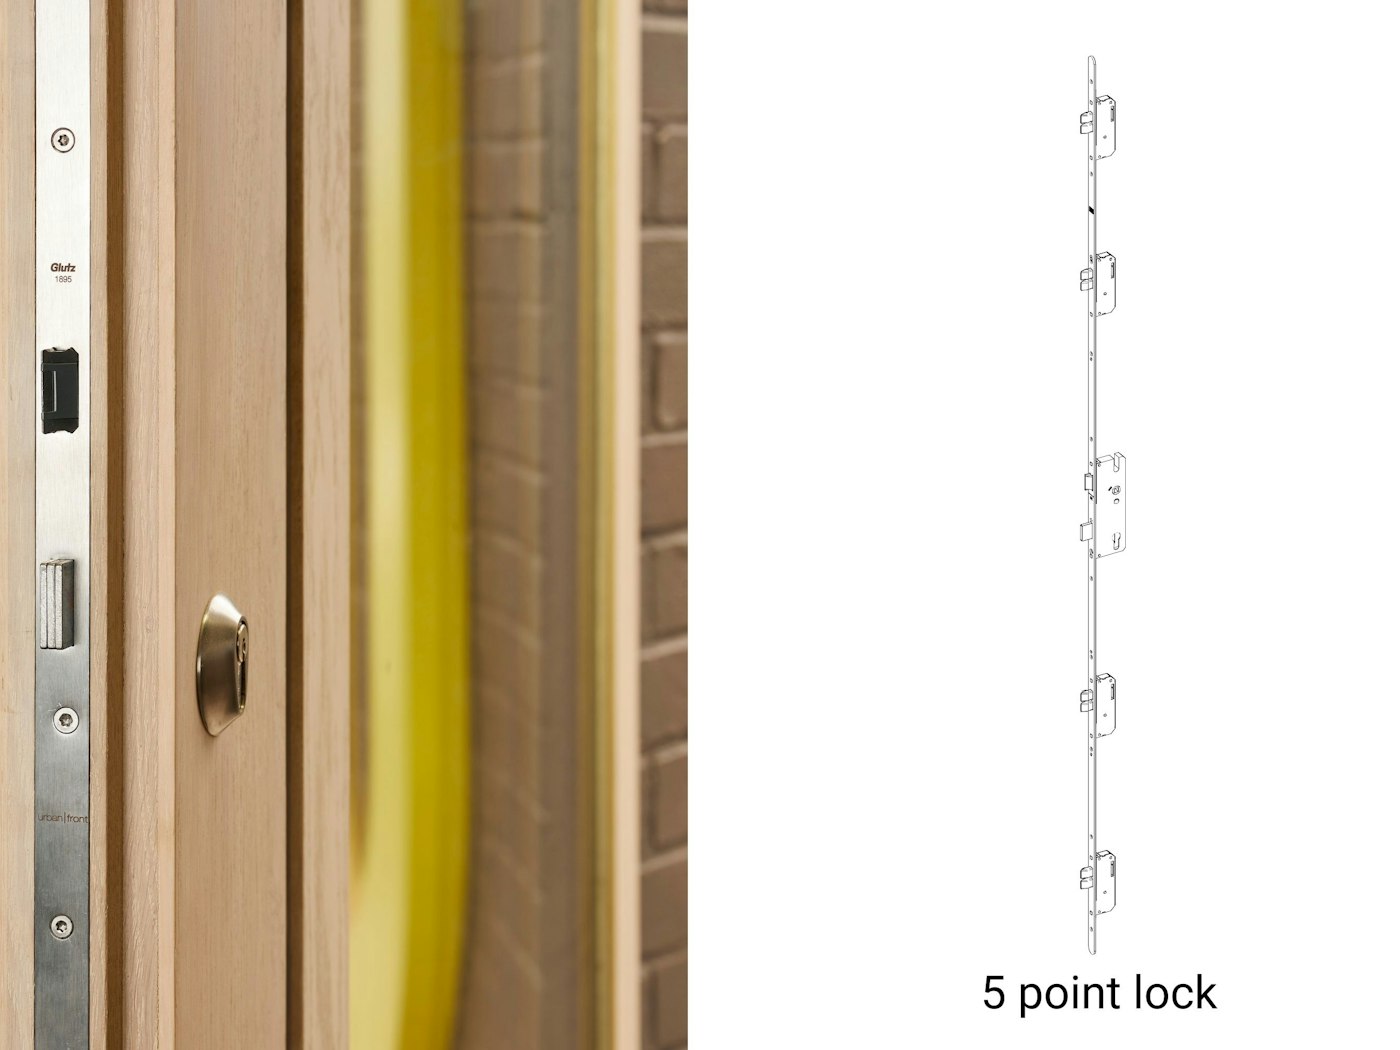 Our doors come fitted as standard with a highly secure 5 point lock